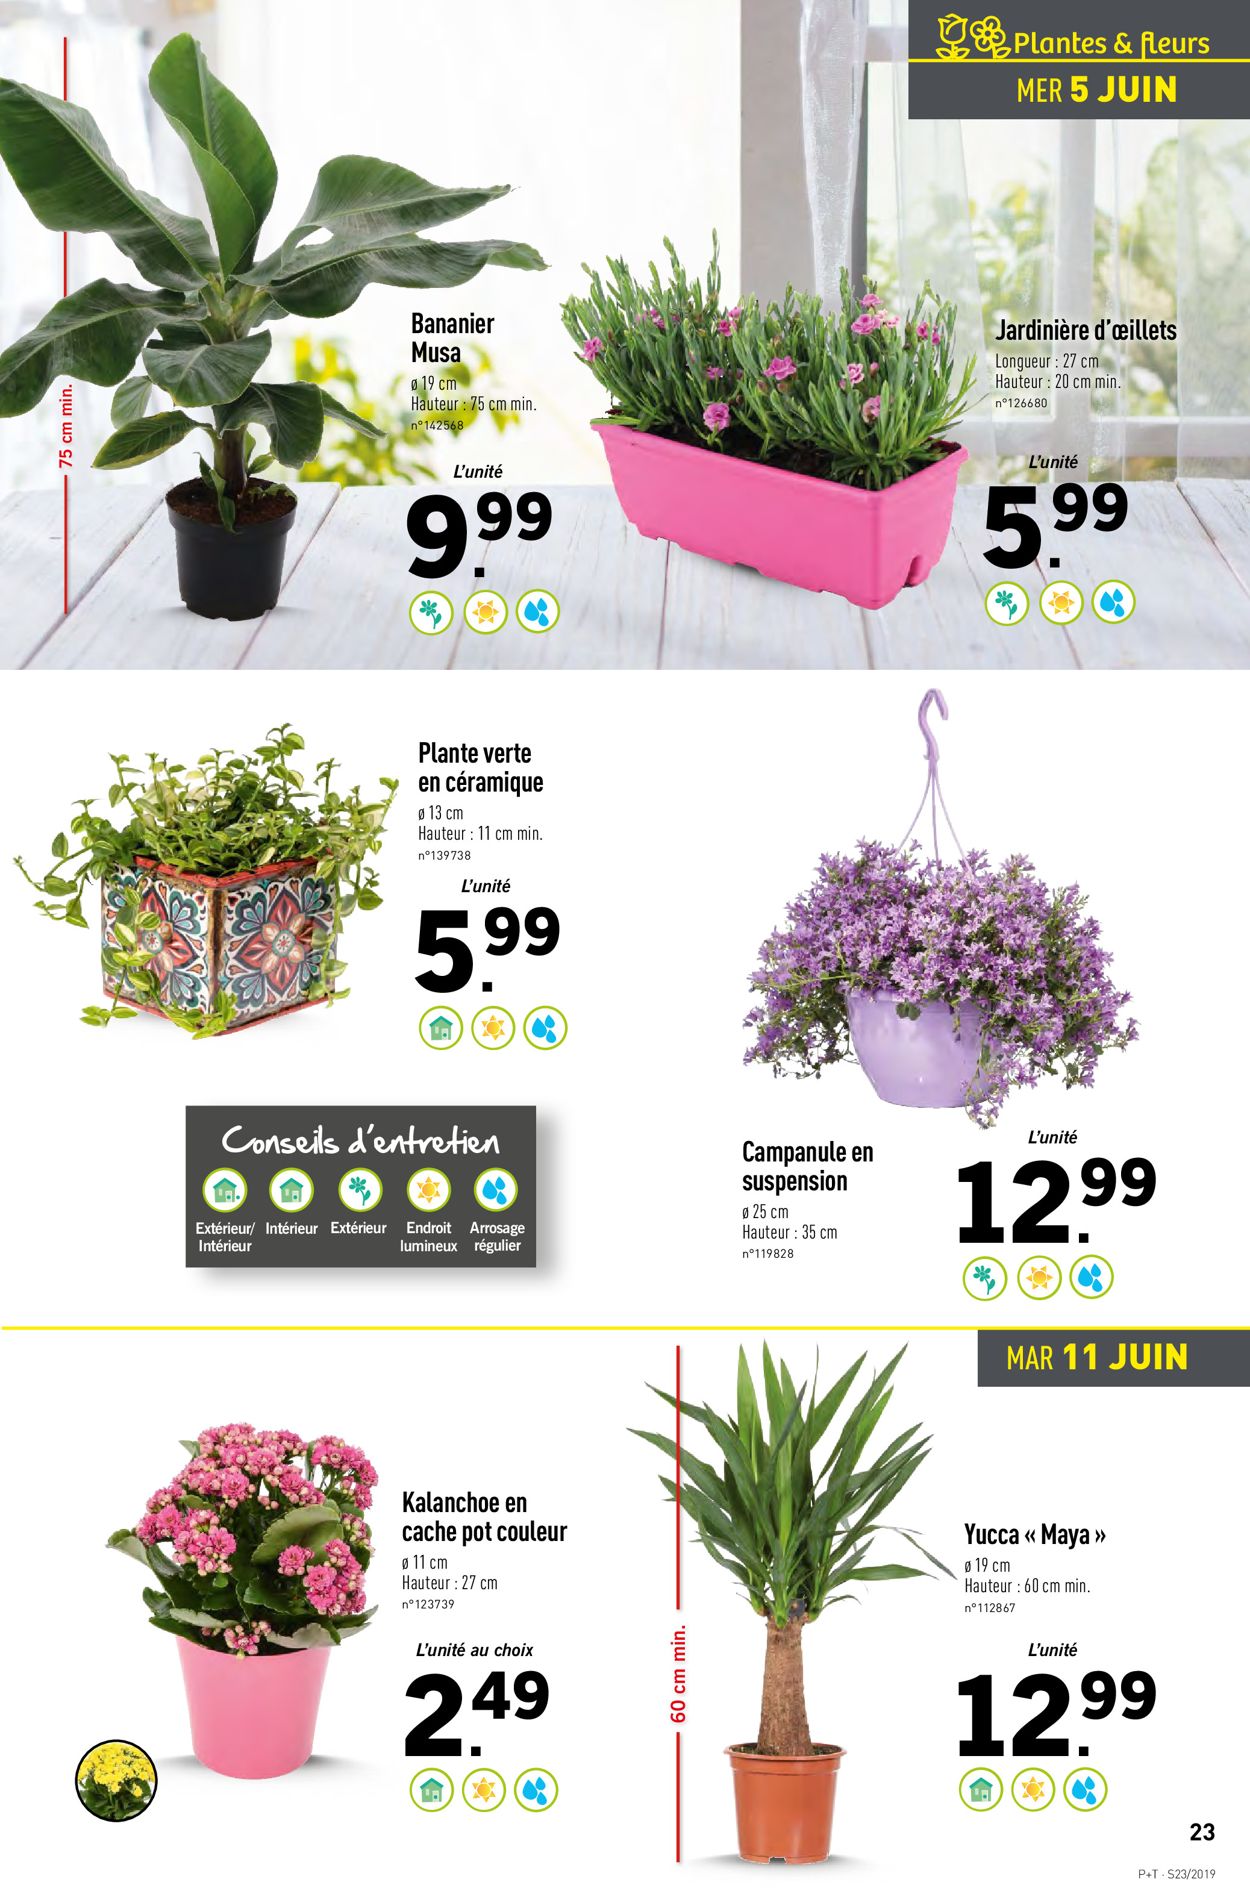 Lidl Catalogue - 05.06-11.06.2019 (Page 23)